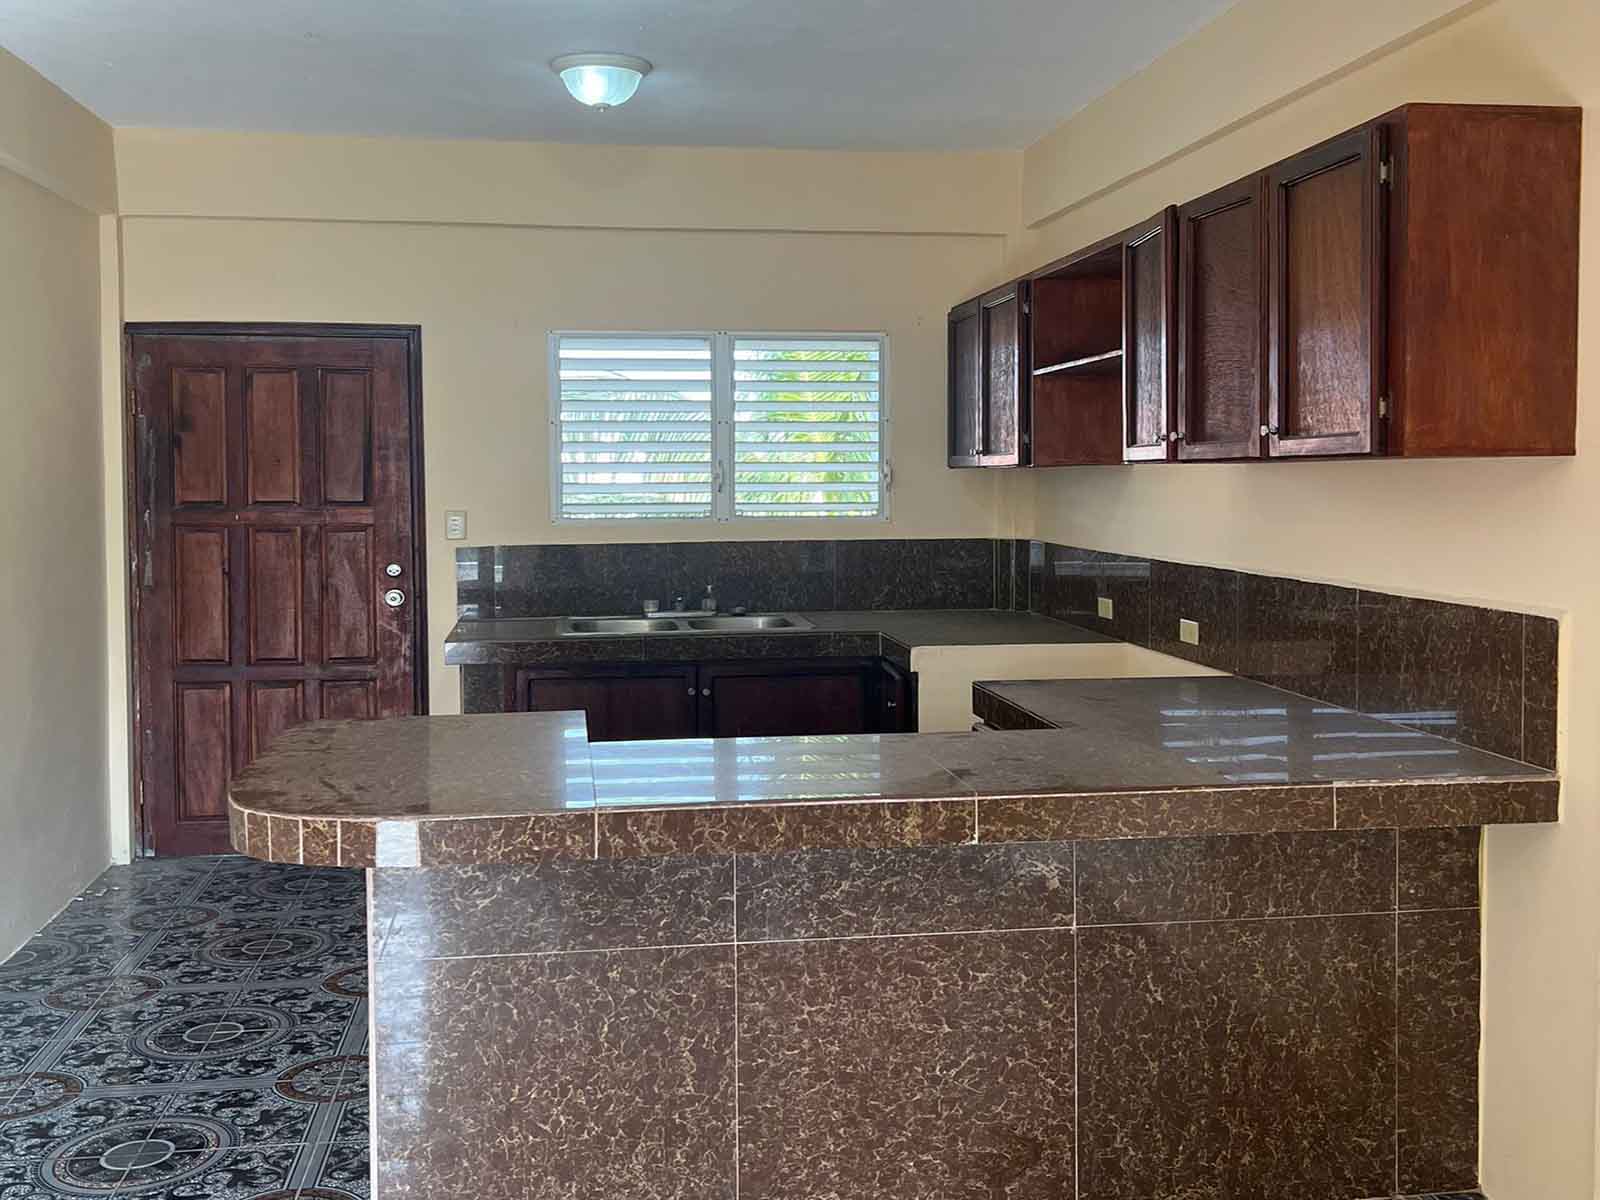 FOR-RENT: 1 Bedroom Apartment in Buttonwood Bay, Belize City